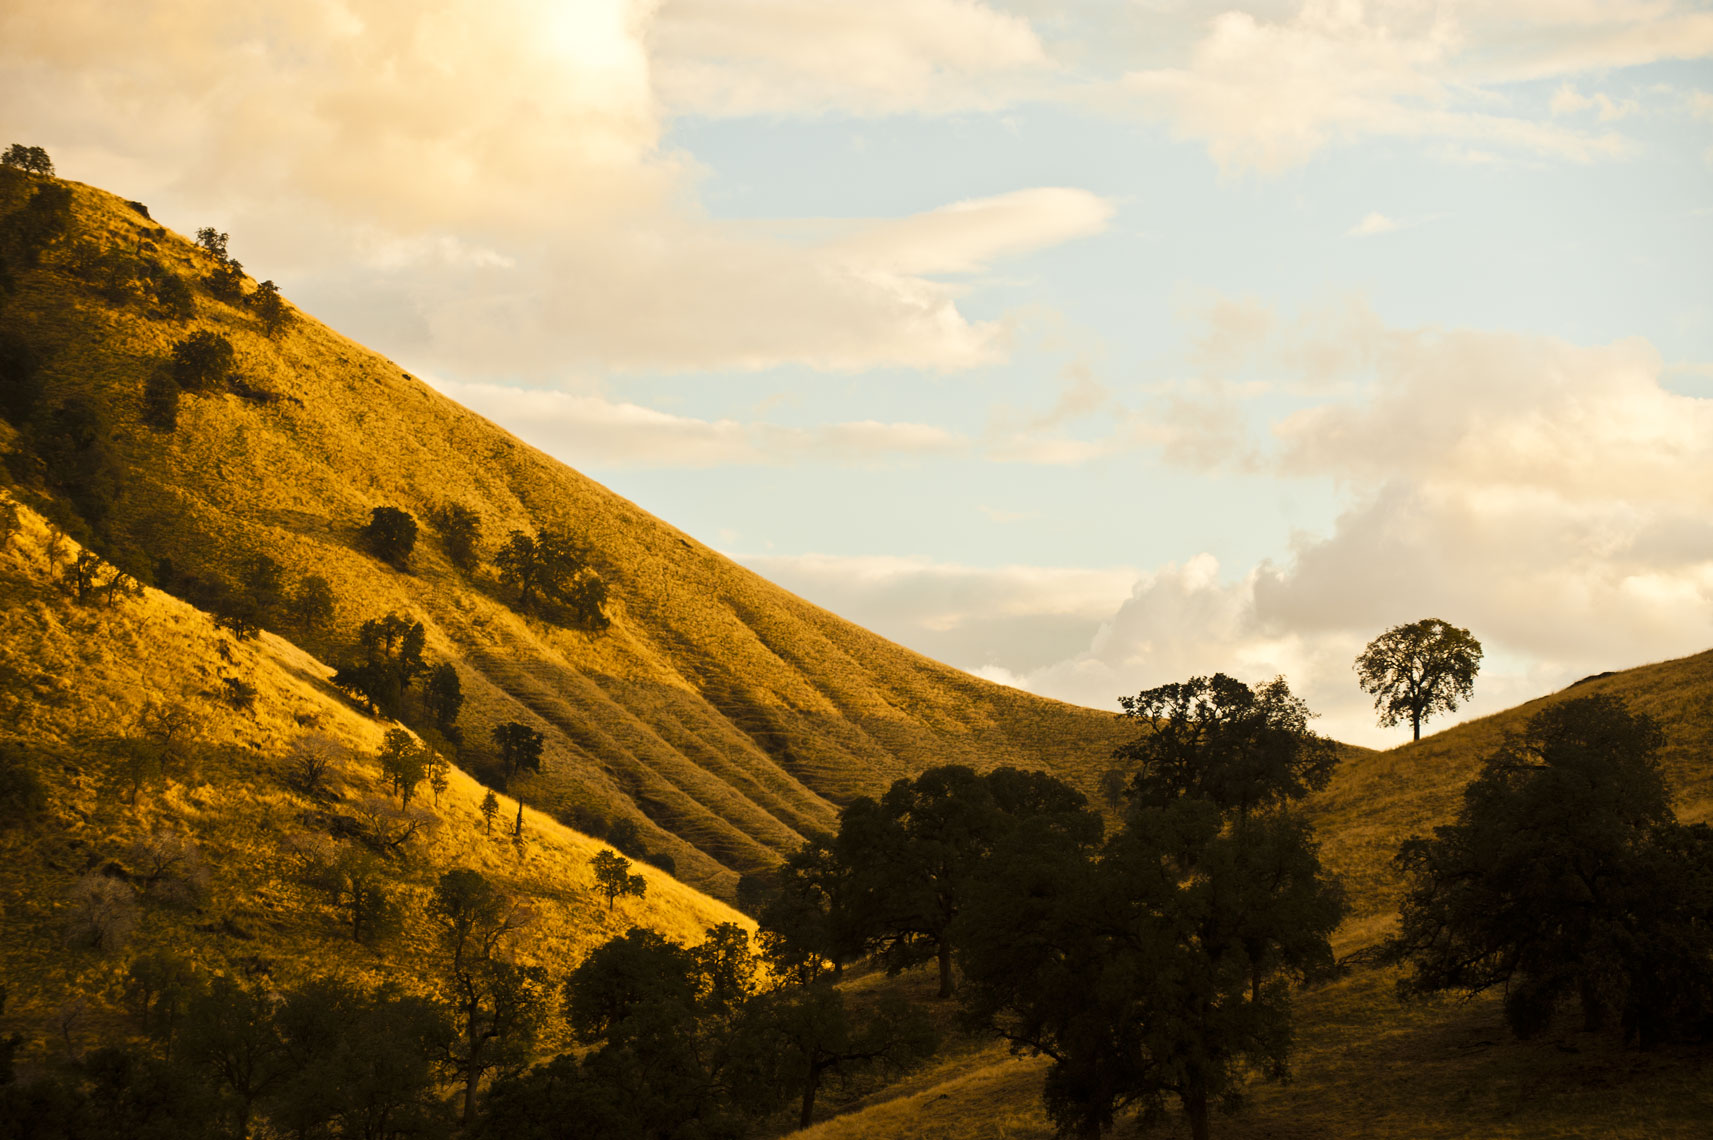 A golden grass covered hill slope in the Yokohl Valley of California